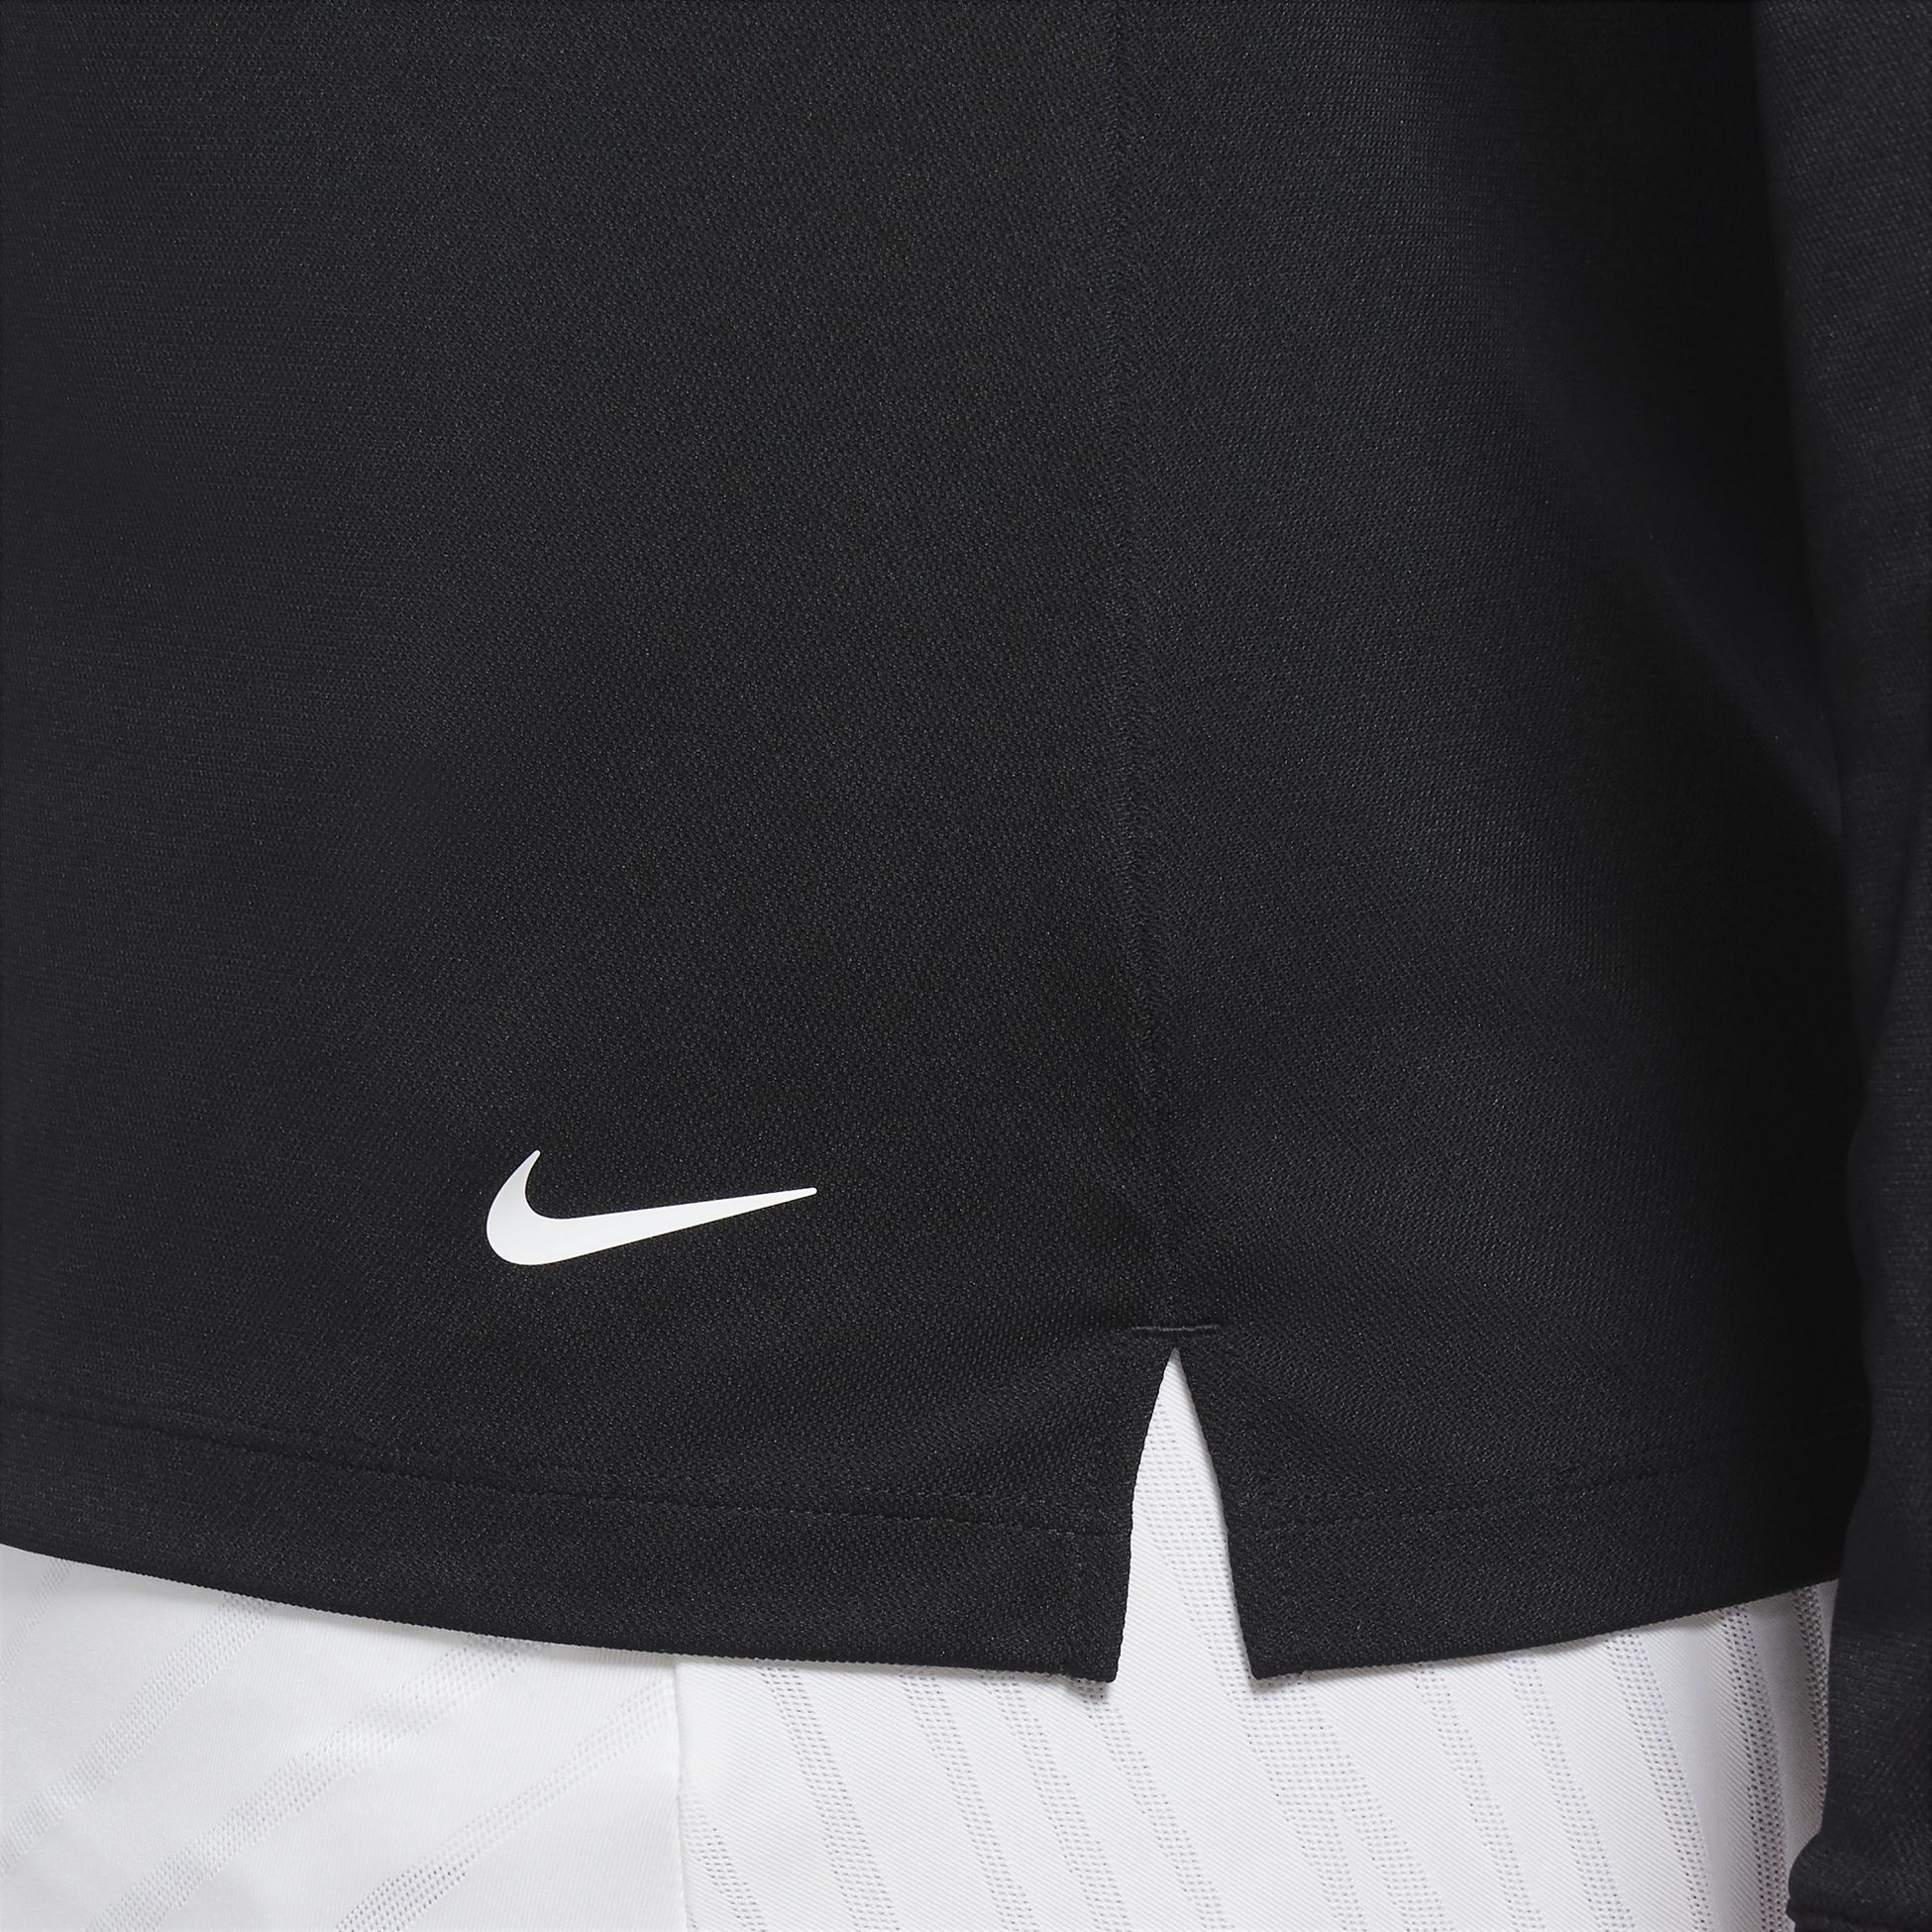 NIKE, W DRI-FIT VCTRY LS POLO